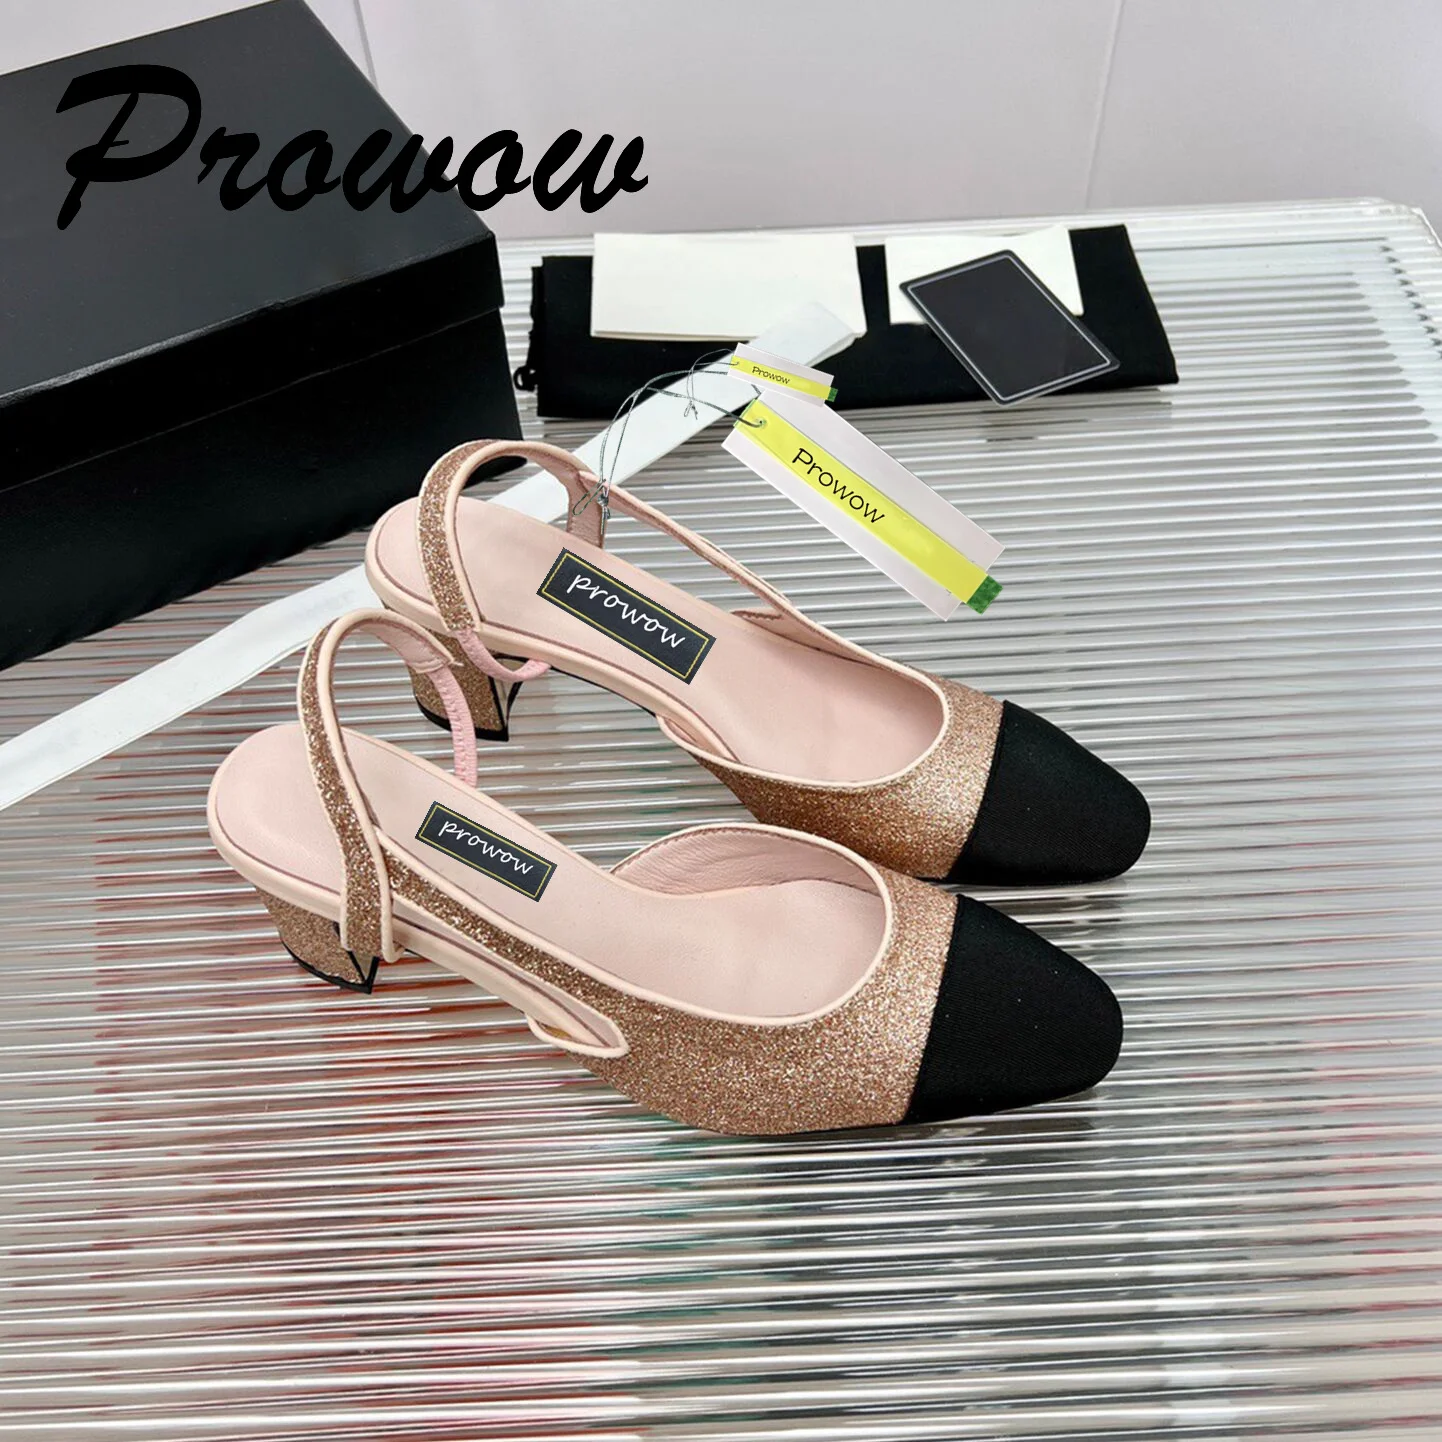 

Prowow New High Quality Genuine Leather Glitter Sling Back Pumps Round Toe Ankle Strap Med Heels Shoes Women Sandals Summer